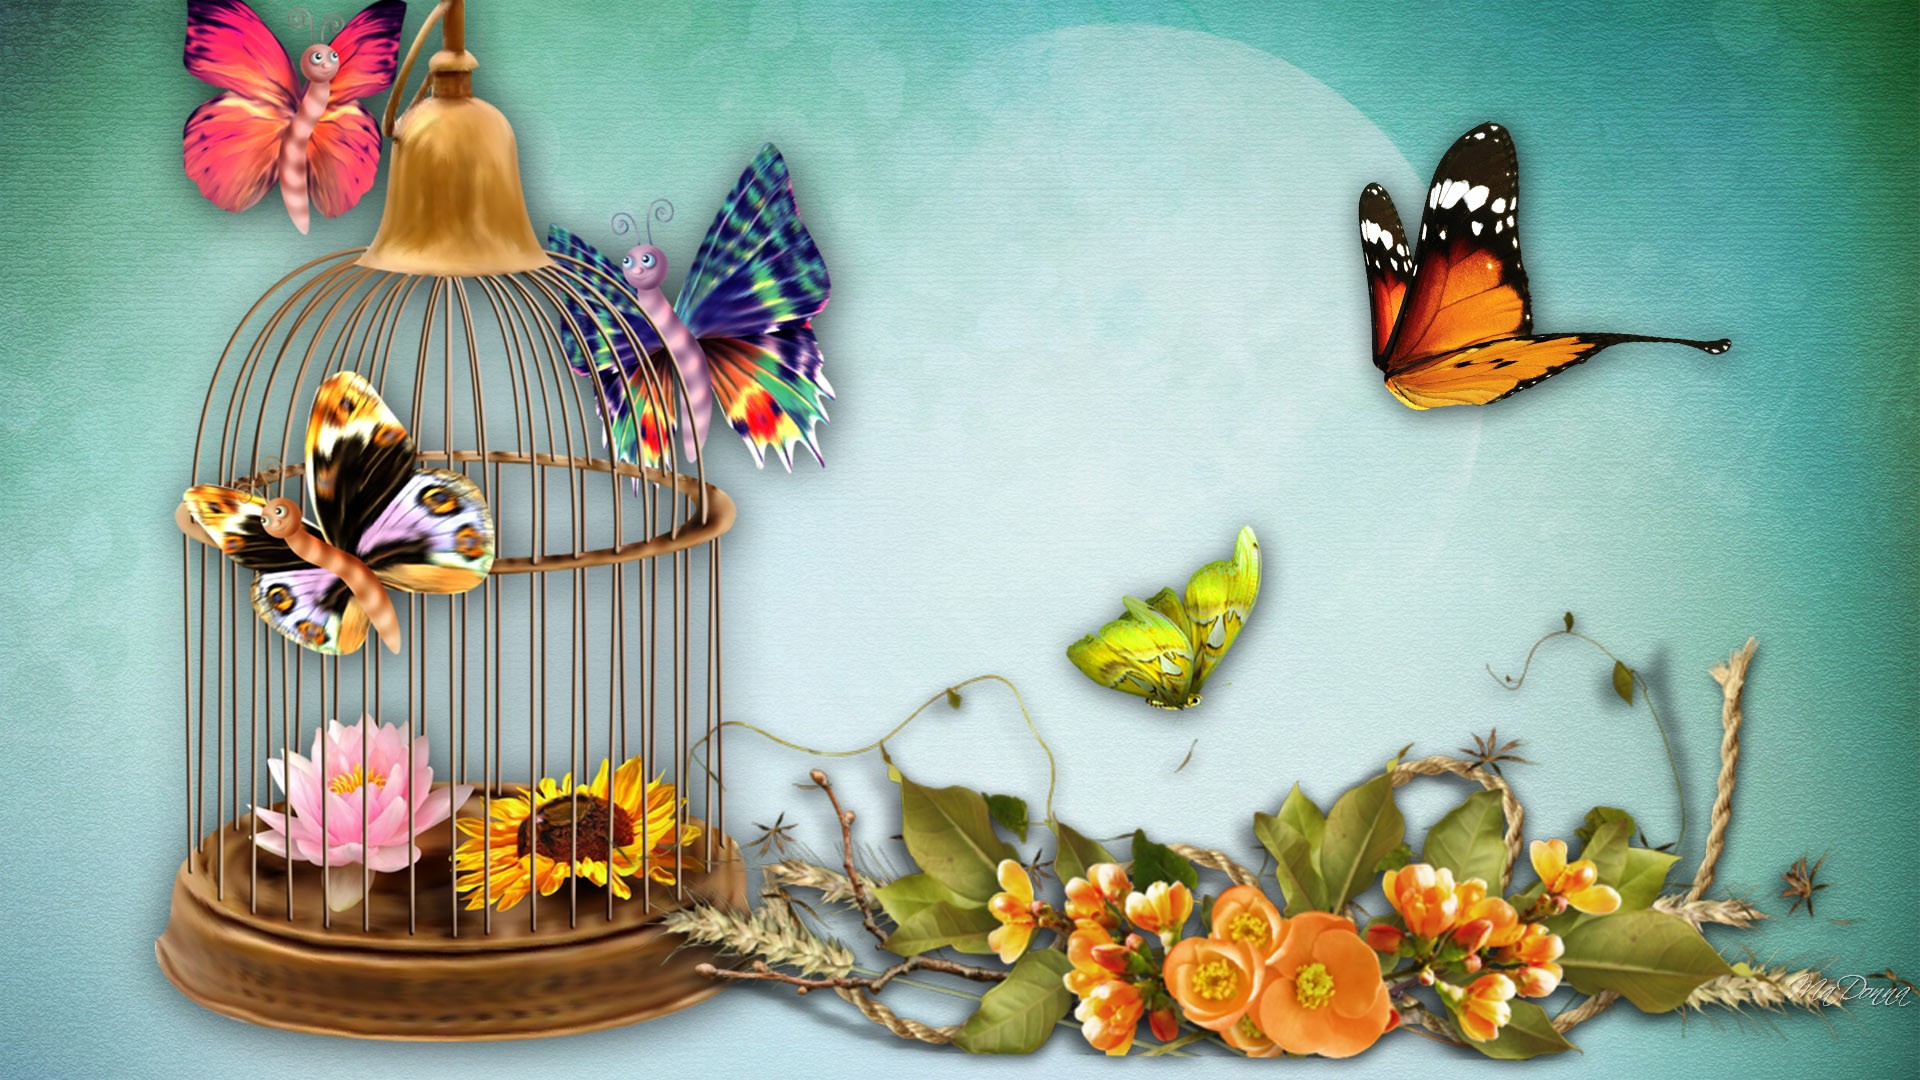 Artistic Birdcage Butterfly Colorful Flower Spring 1920x1080